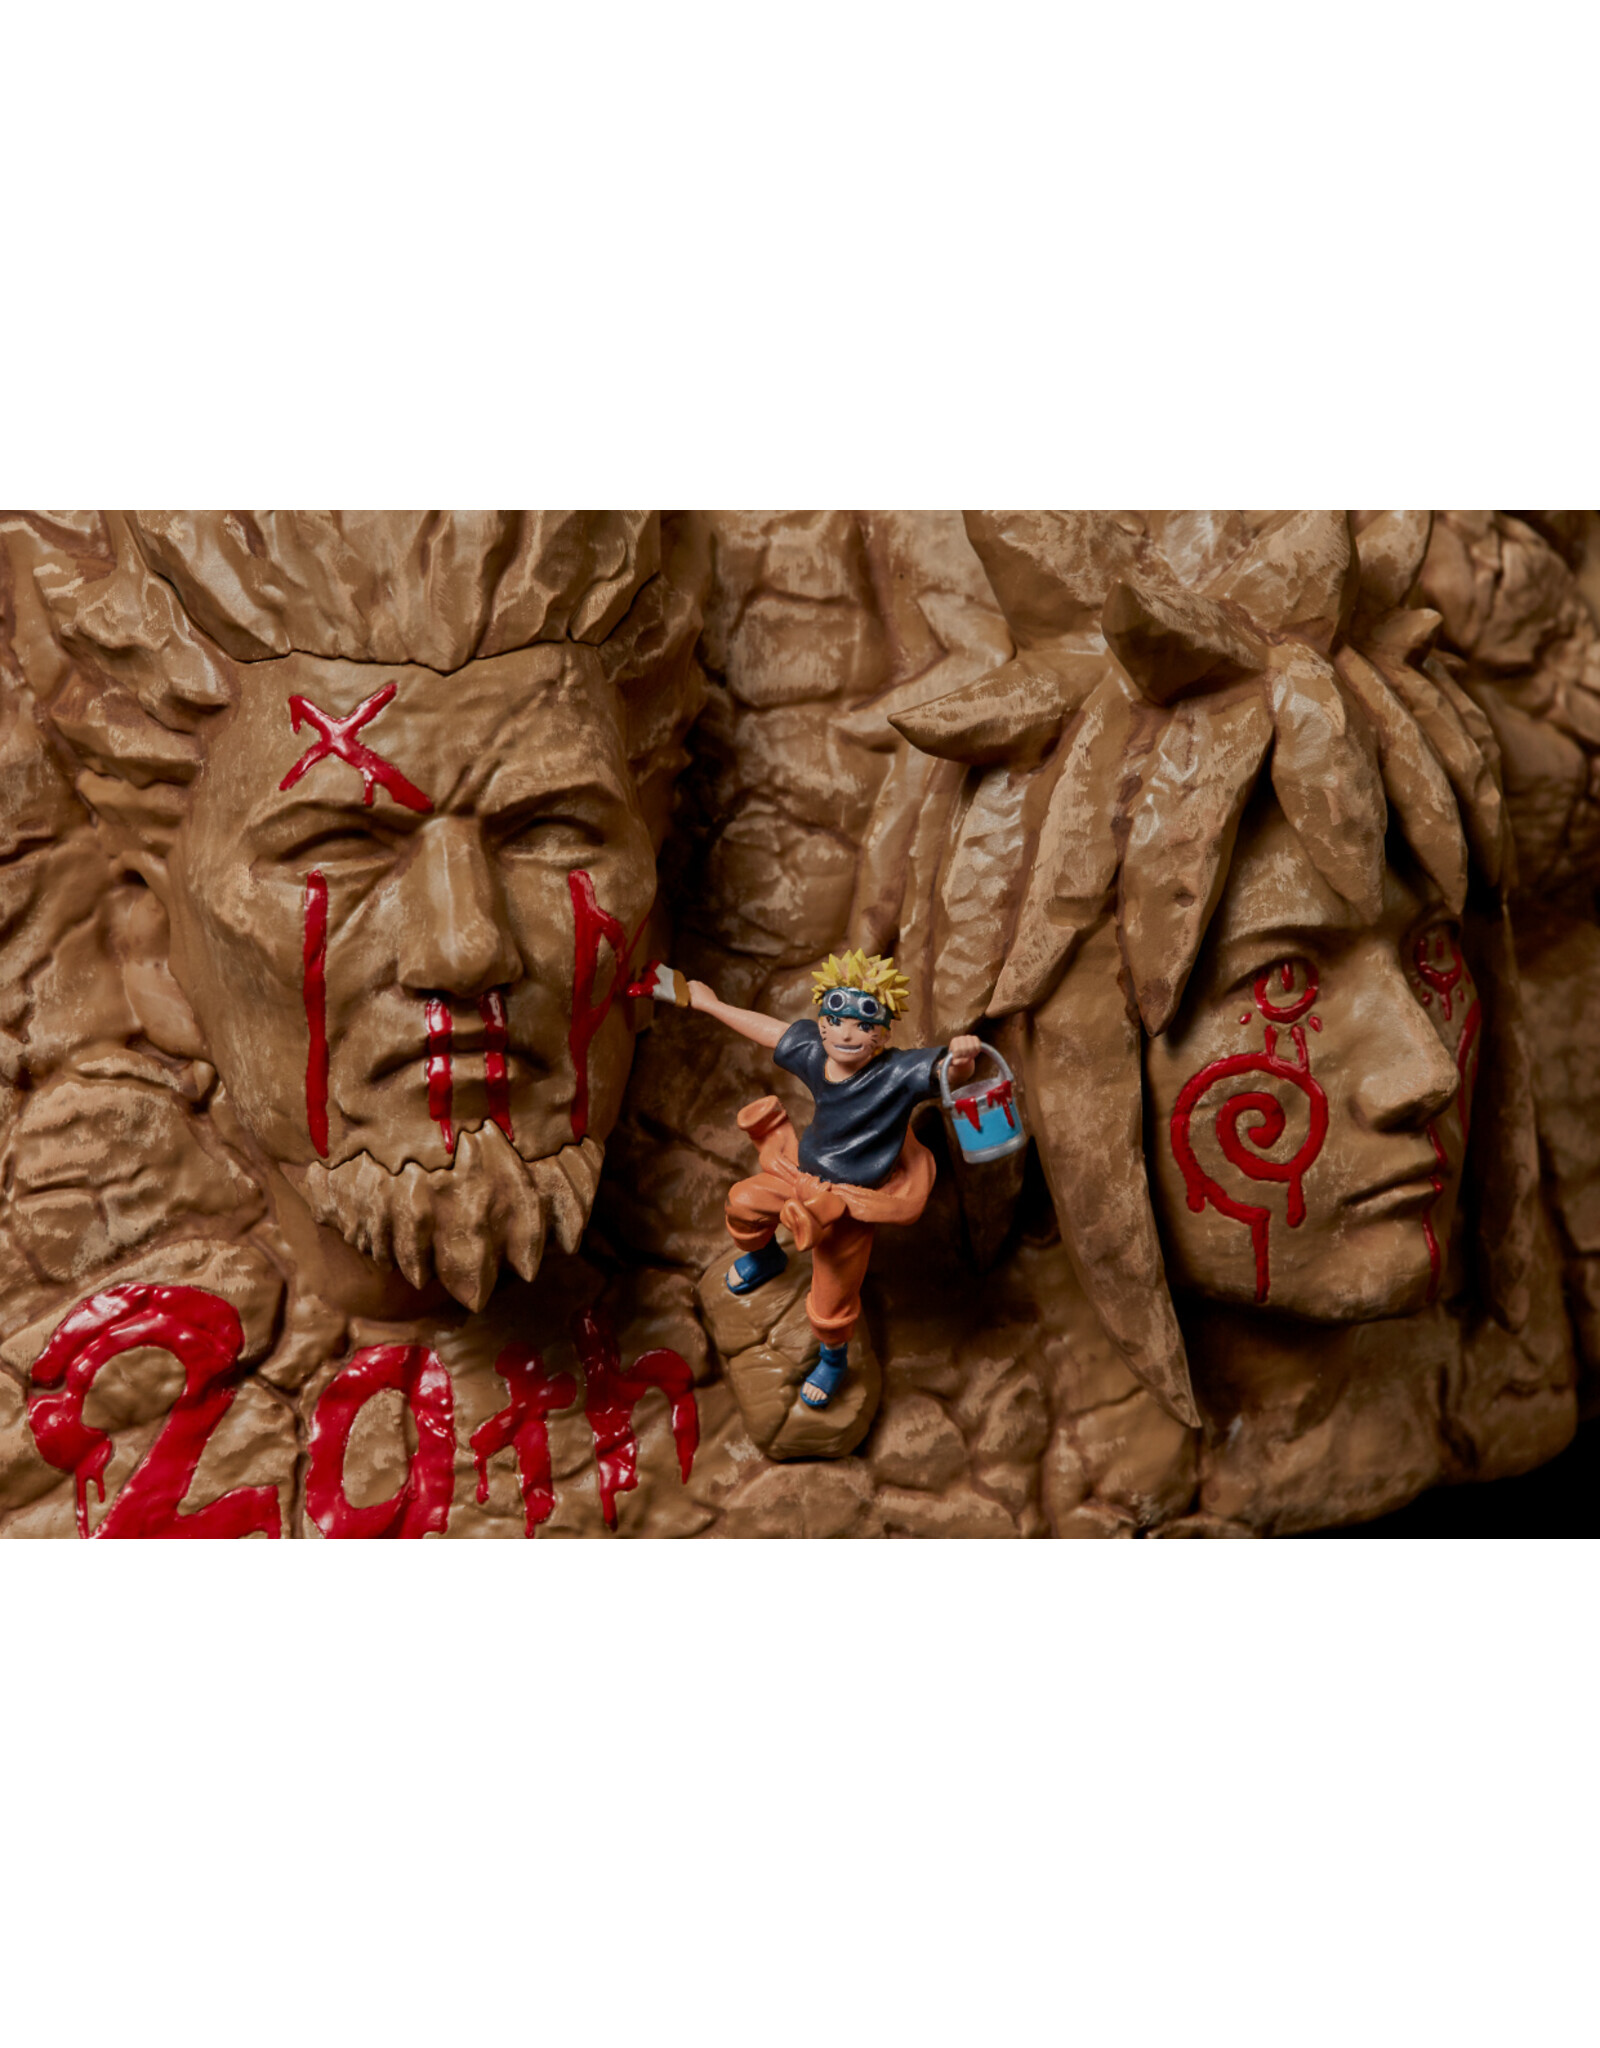 Naruto Shippuden 20th Anniversary "Growth" 1/6 Scale Figure *Pre-Order* *DEPOSIT ONLY*